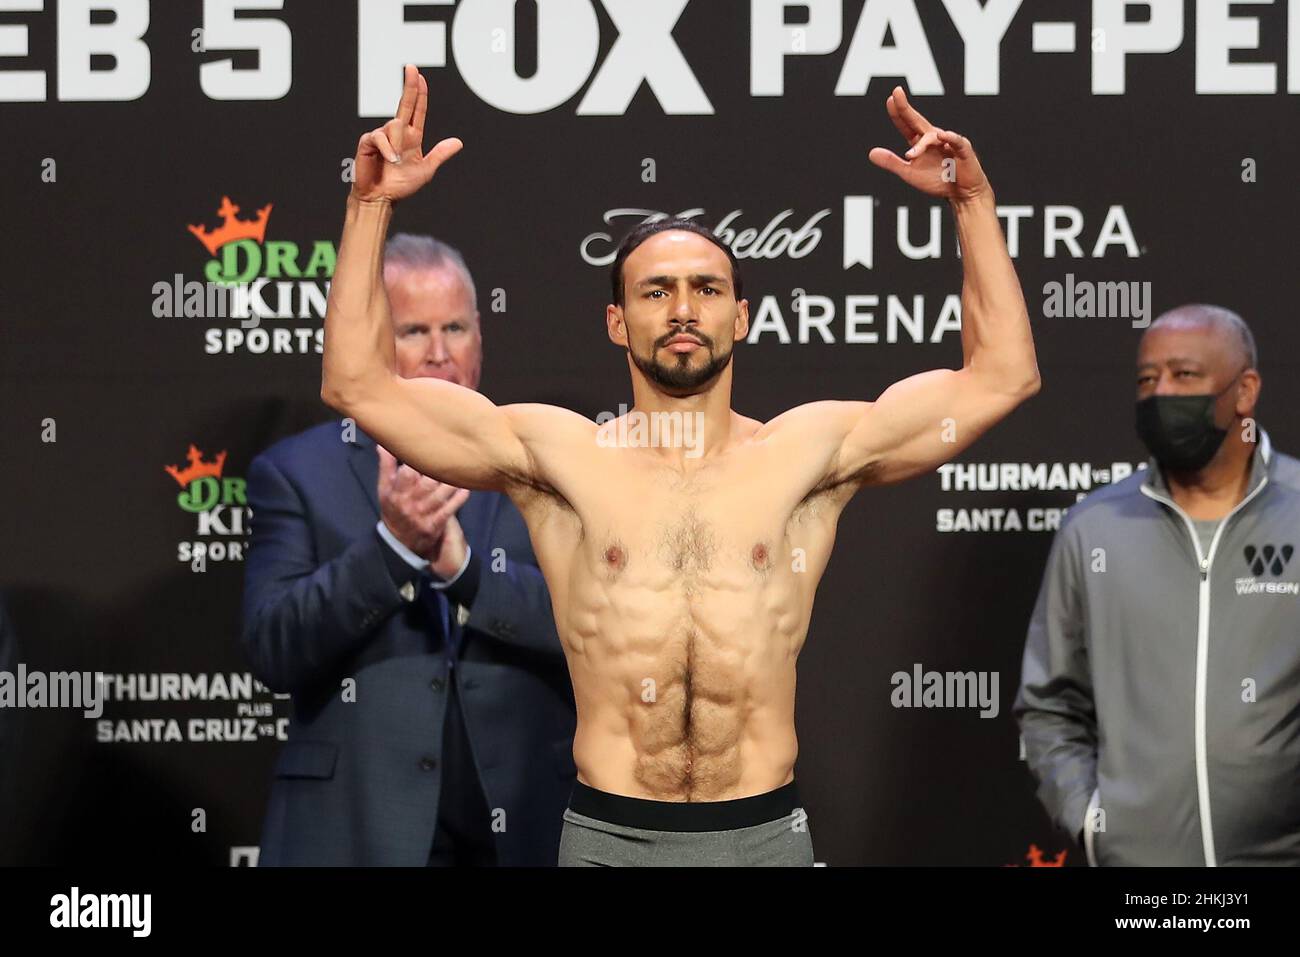 Las Vegas, USA. 04th Feb, 2022. LAS VEGAS, NV - FEBRUARY 4: Boxer Keith Thurman poses on the scale during the official weigh-in for his bout against Mario Barrios at the Mandalay Bay Michelob Ultra Arena February 5, 2022 in Las Vegas, Nevada. (Photo by Alejandro Salazar/PxImages) Credit: Px Images/Alamy Live News Stock Photo